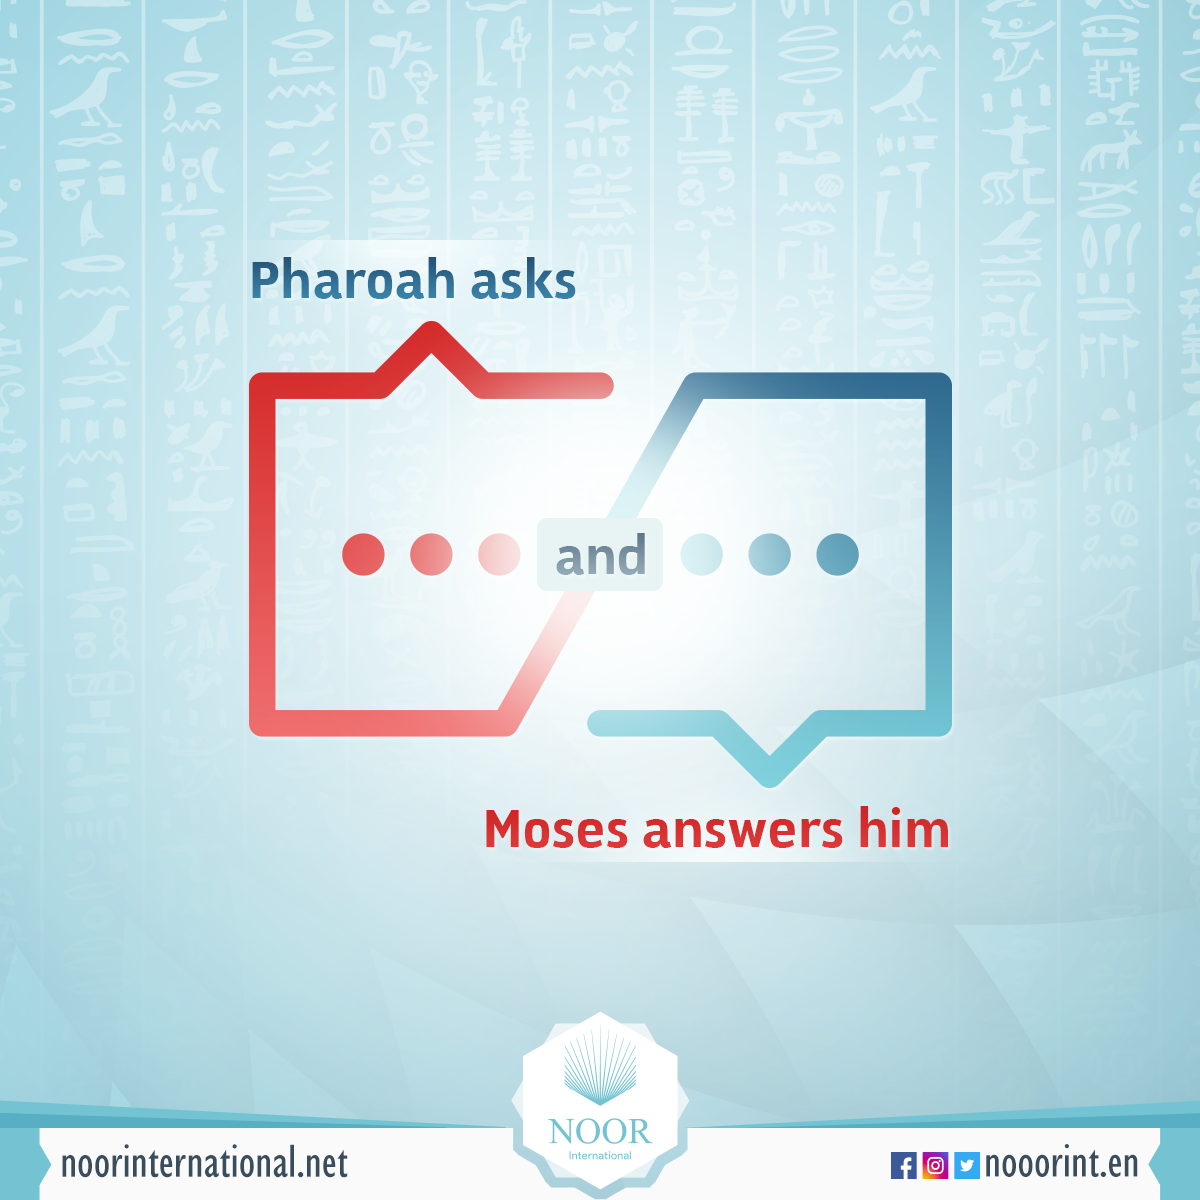 Moses in the Qur'an